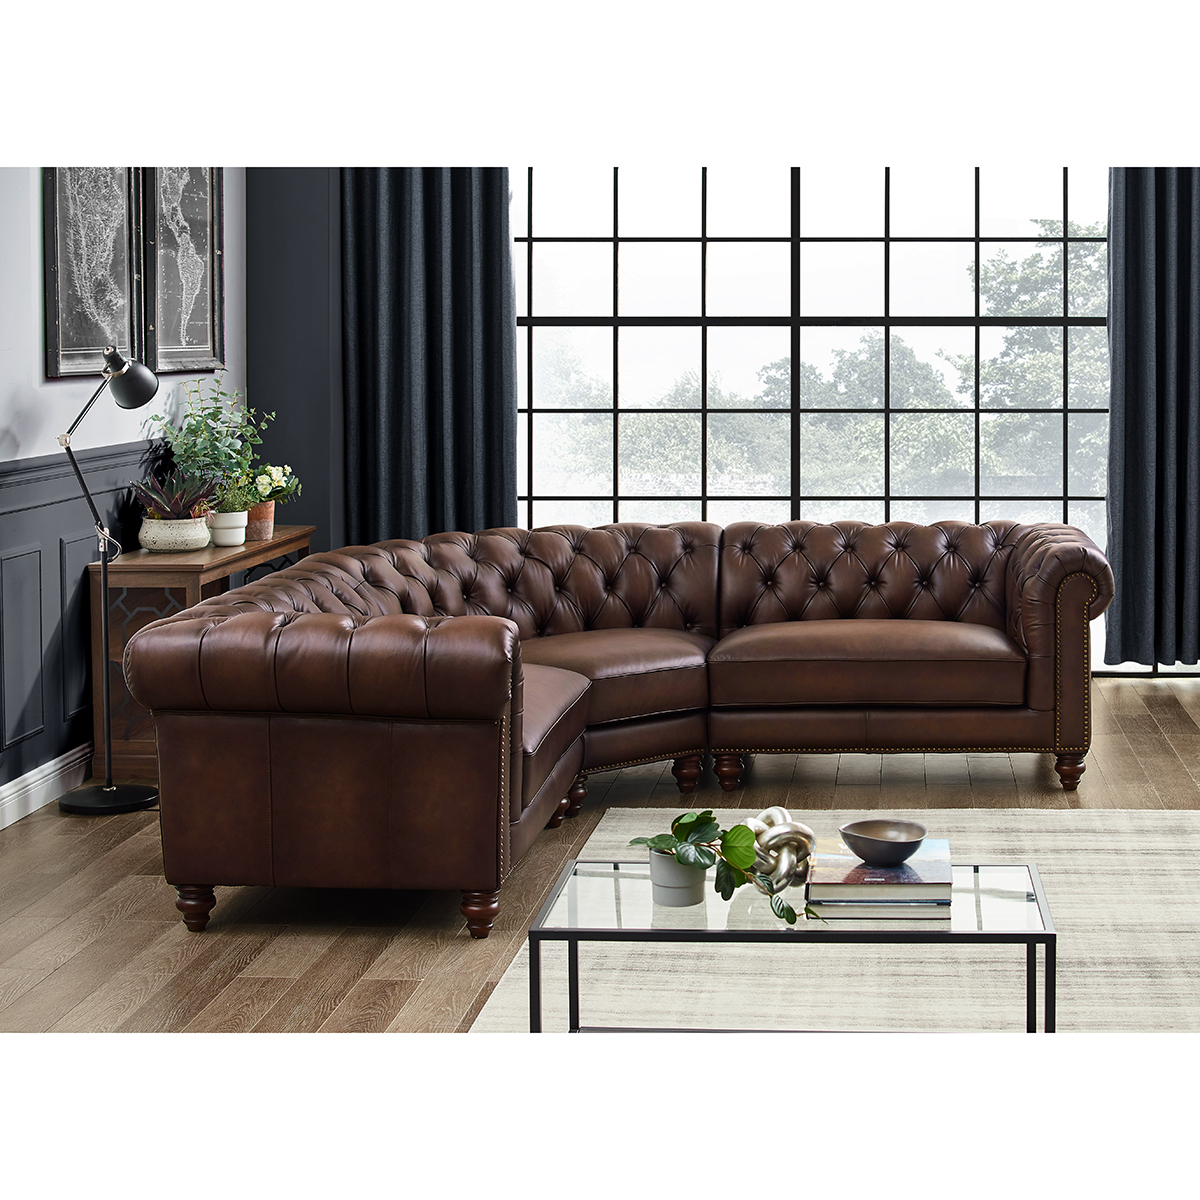 Image of Allington Leather Chesterfield Corner Sofa, Brown